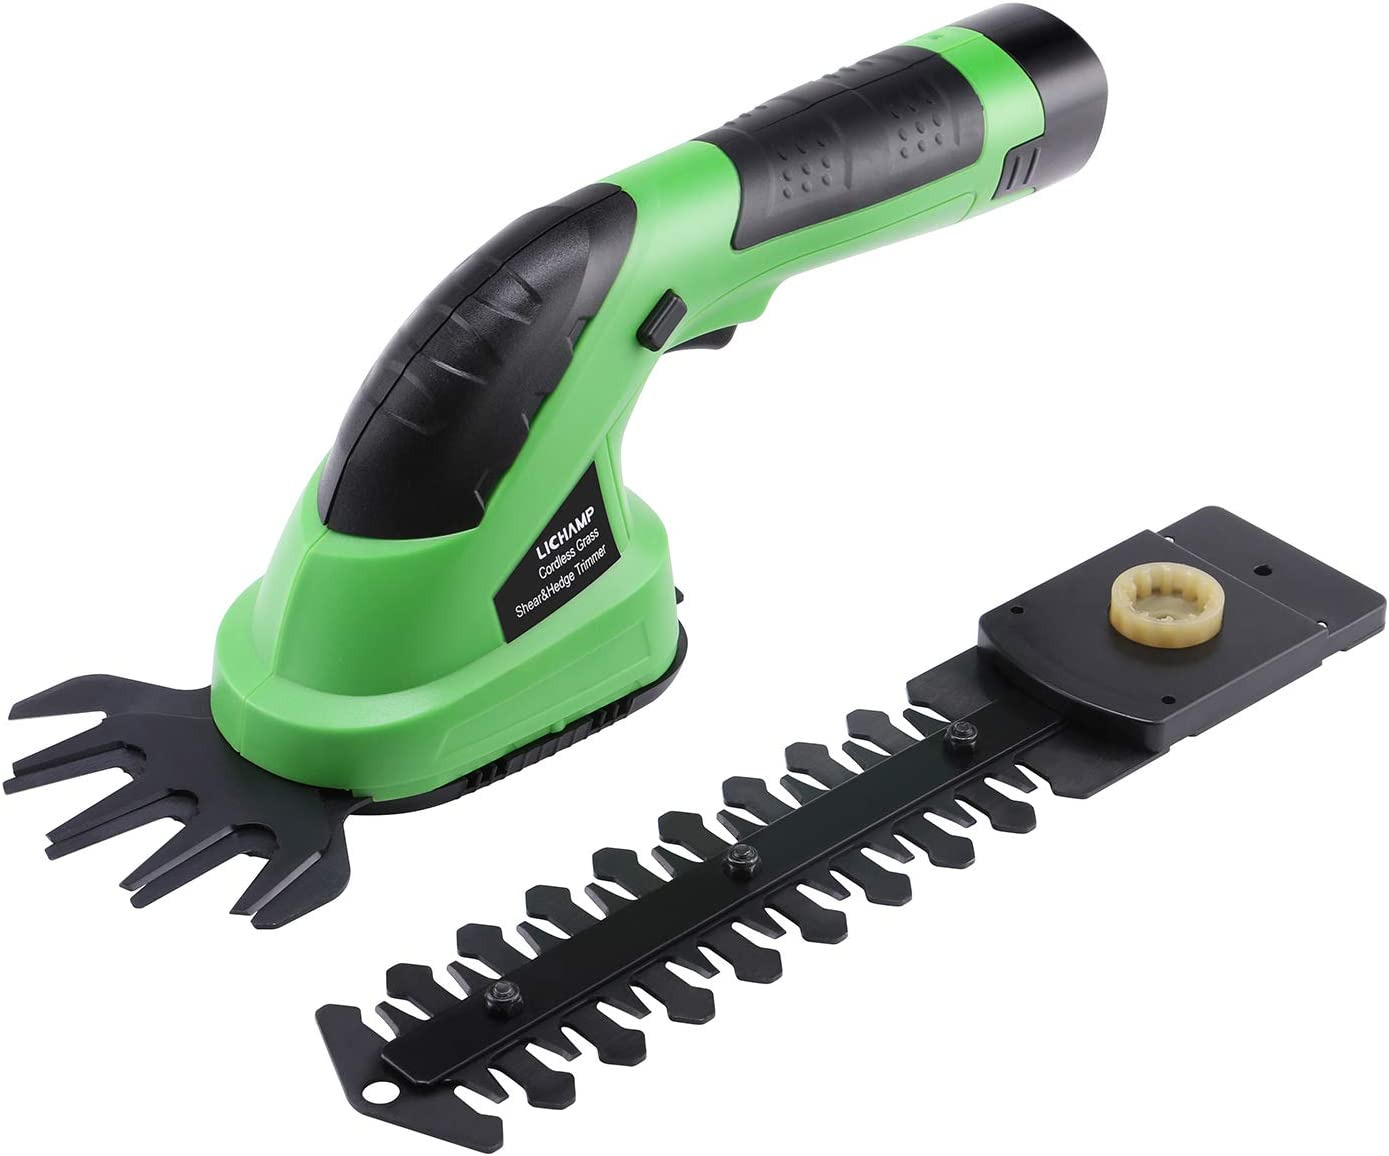 Lichamp 2-in-1 Electric Hand Held Grass Shear Hedge Trimmer Shrubbery Clipper